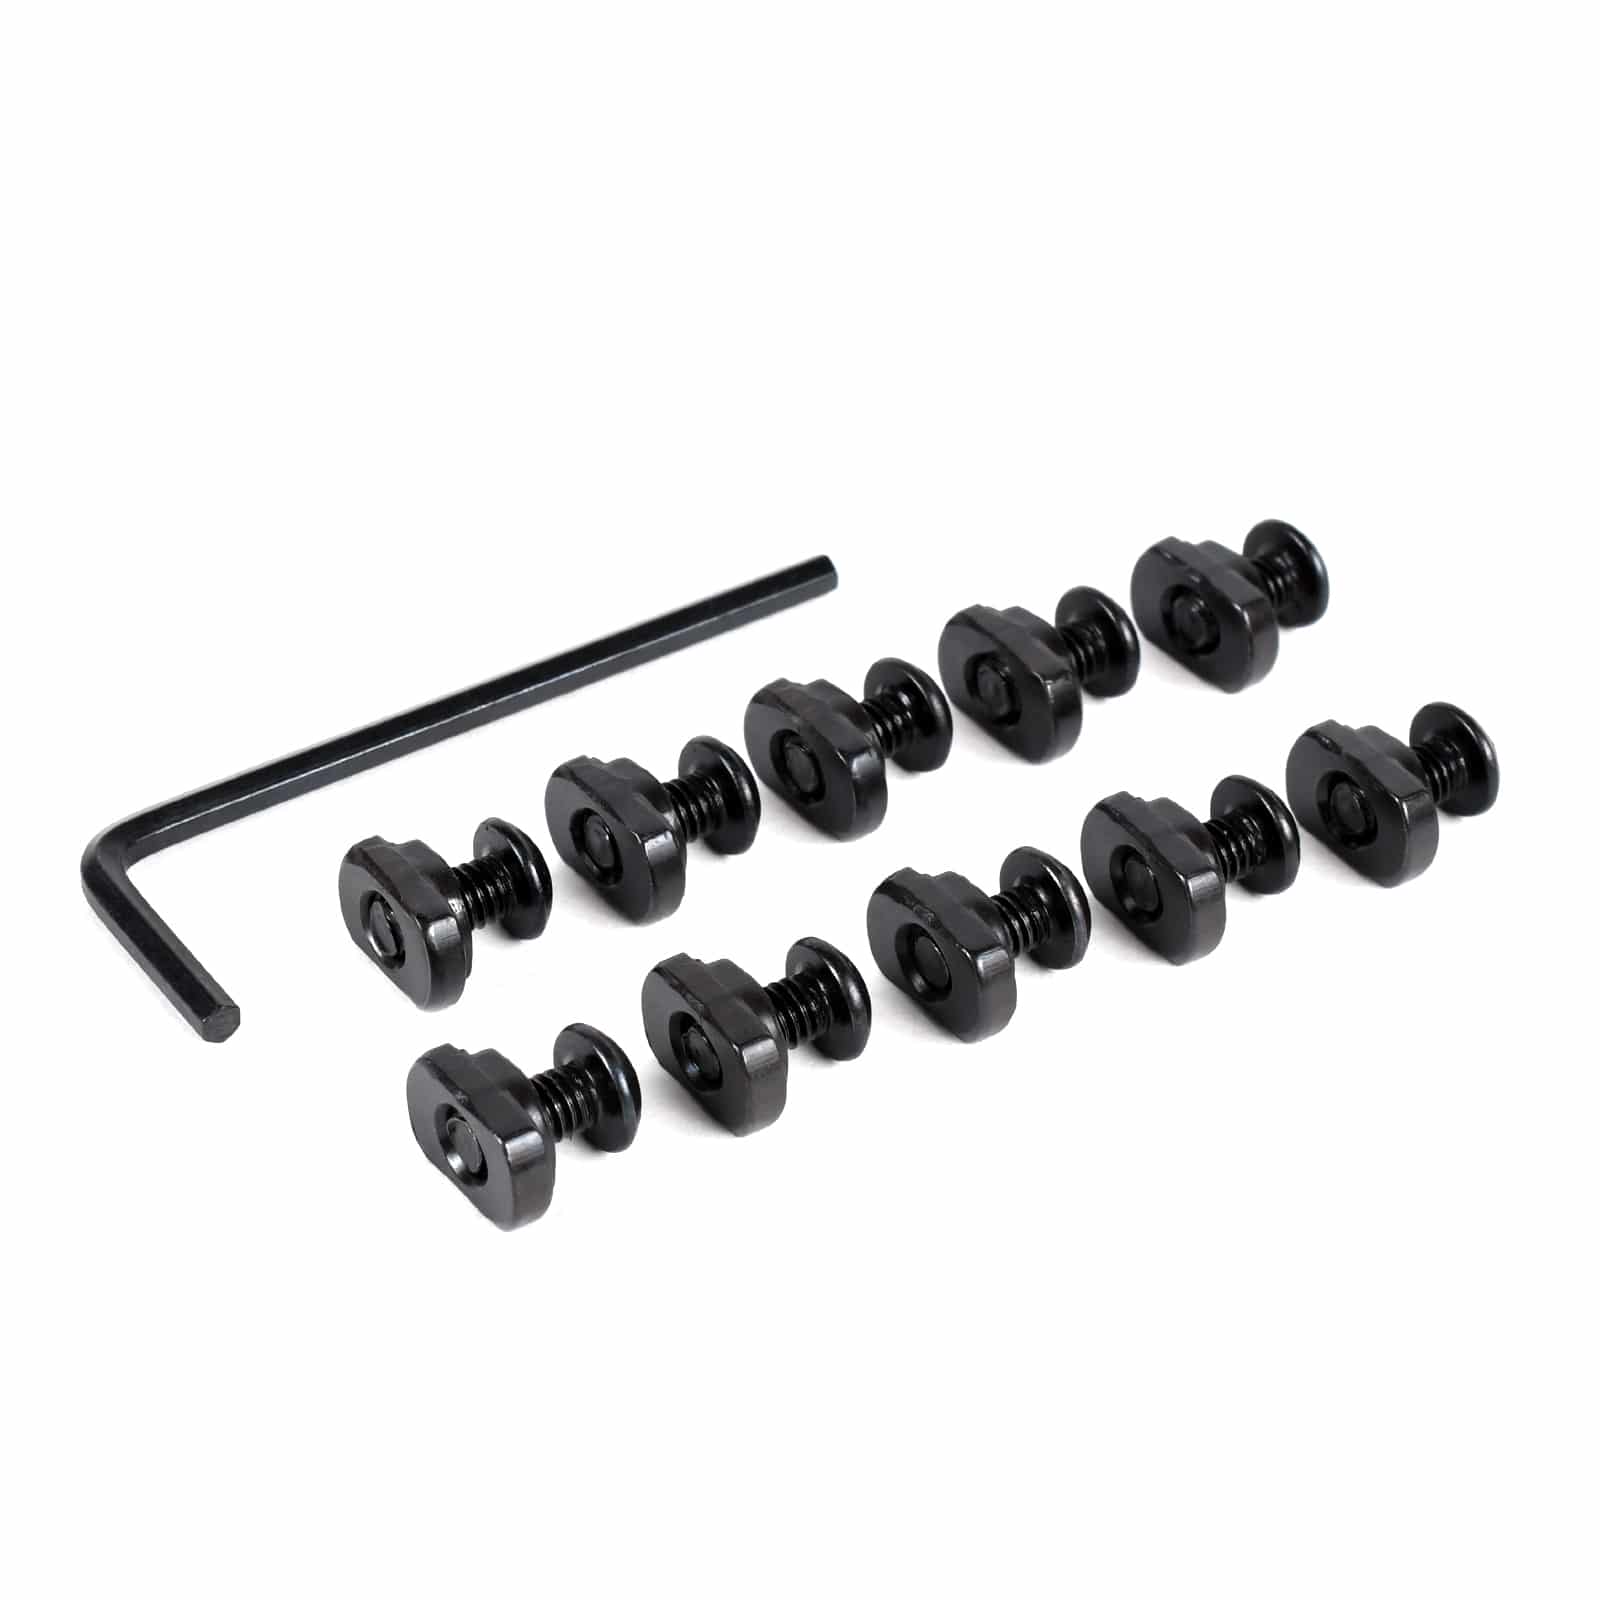 GOTICAL Combo of 5 Slots & 7 Slots M-Lock Rail Picatinny Rail Section Adapter Super Value Pack M-Lock with Set of Screws ML0K Picatinny Accessory Rail 